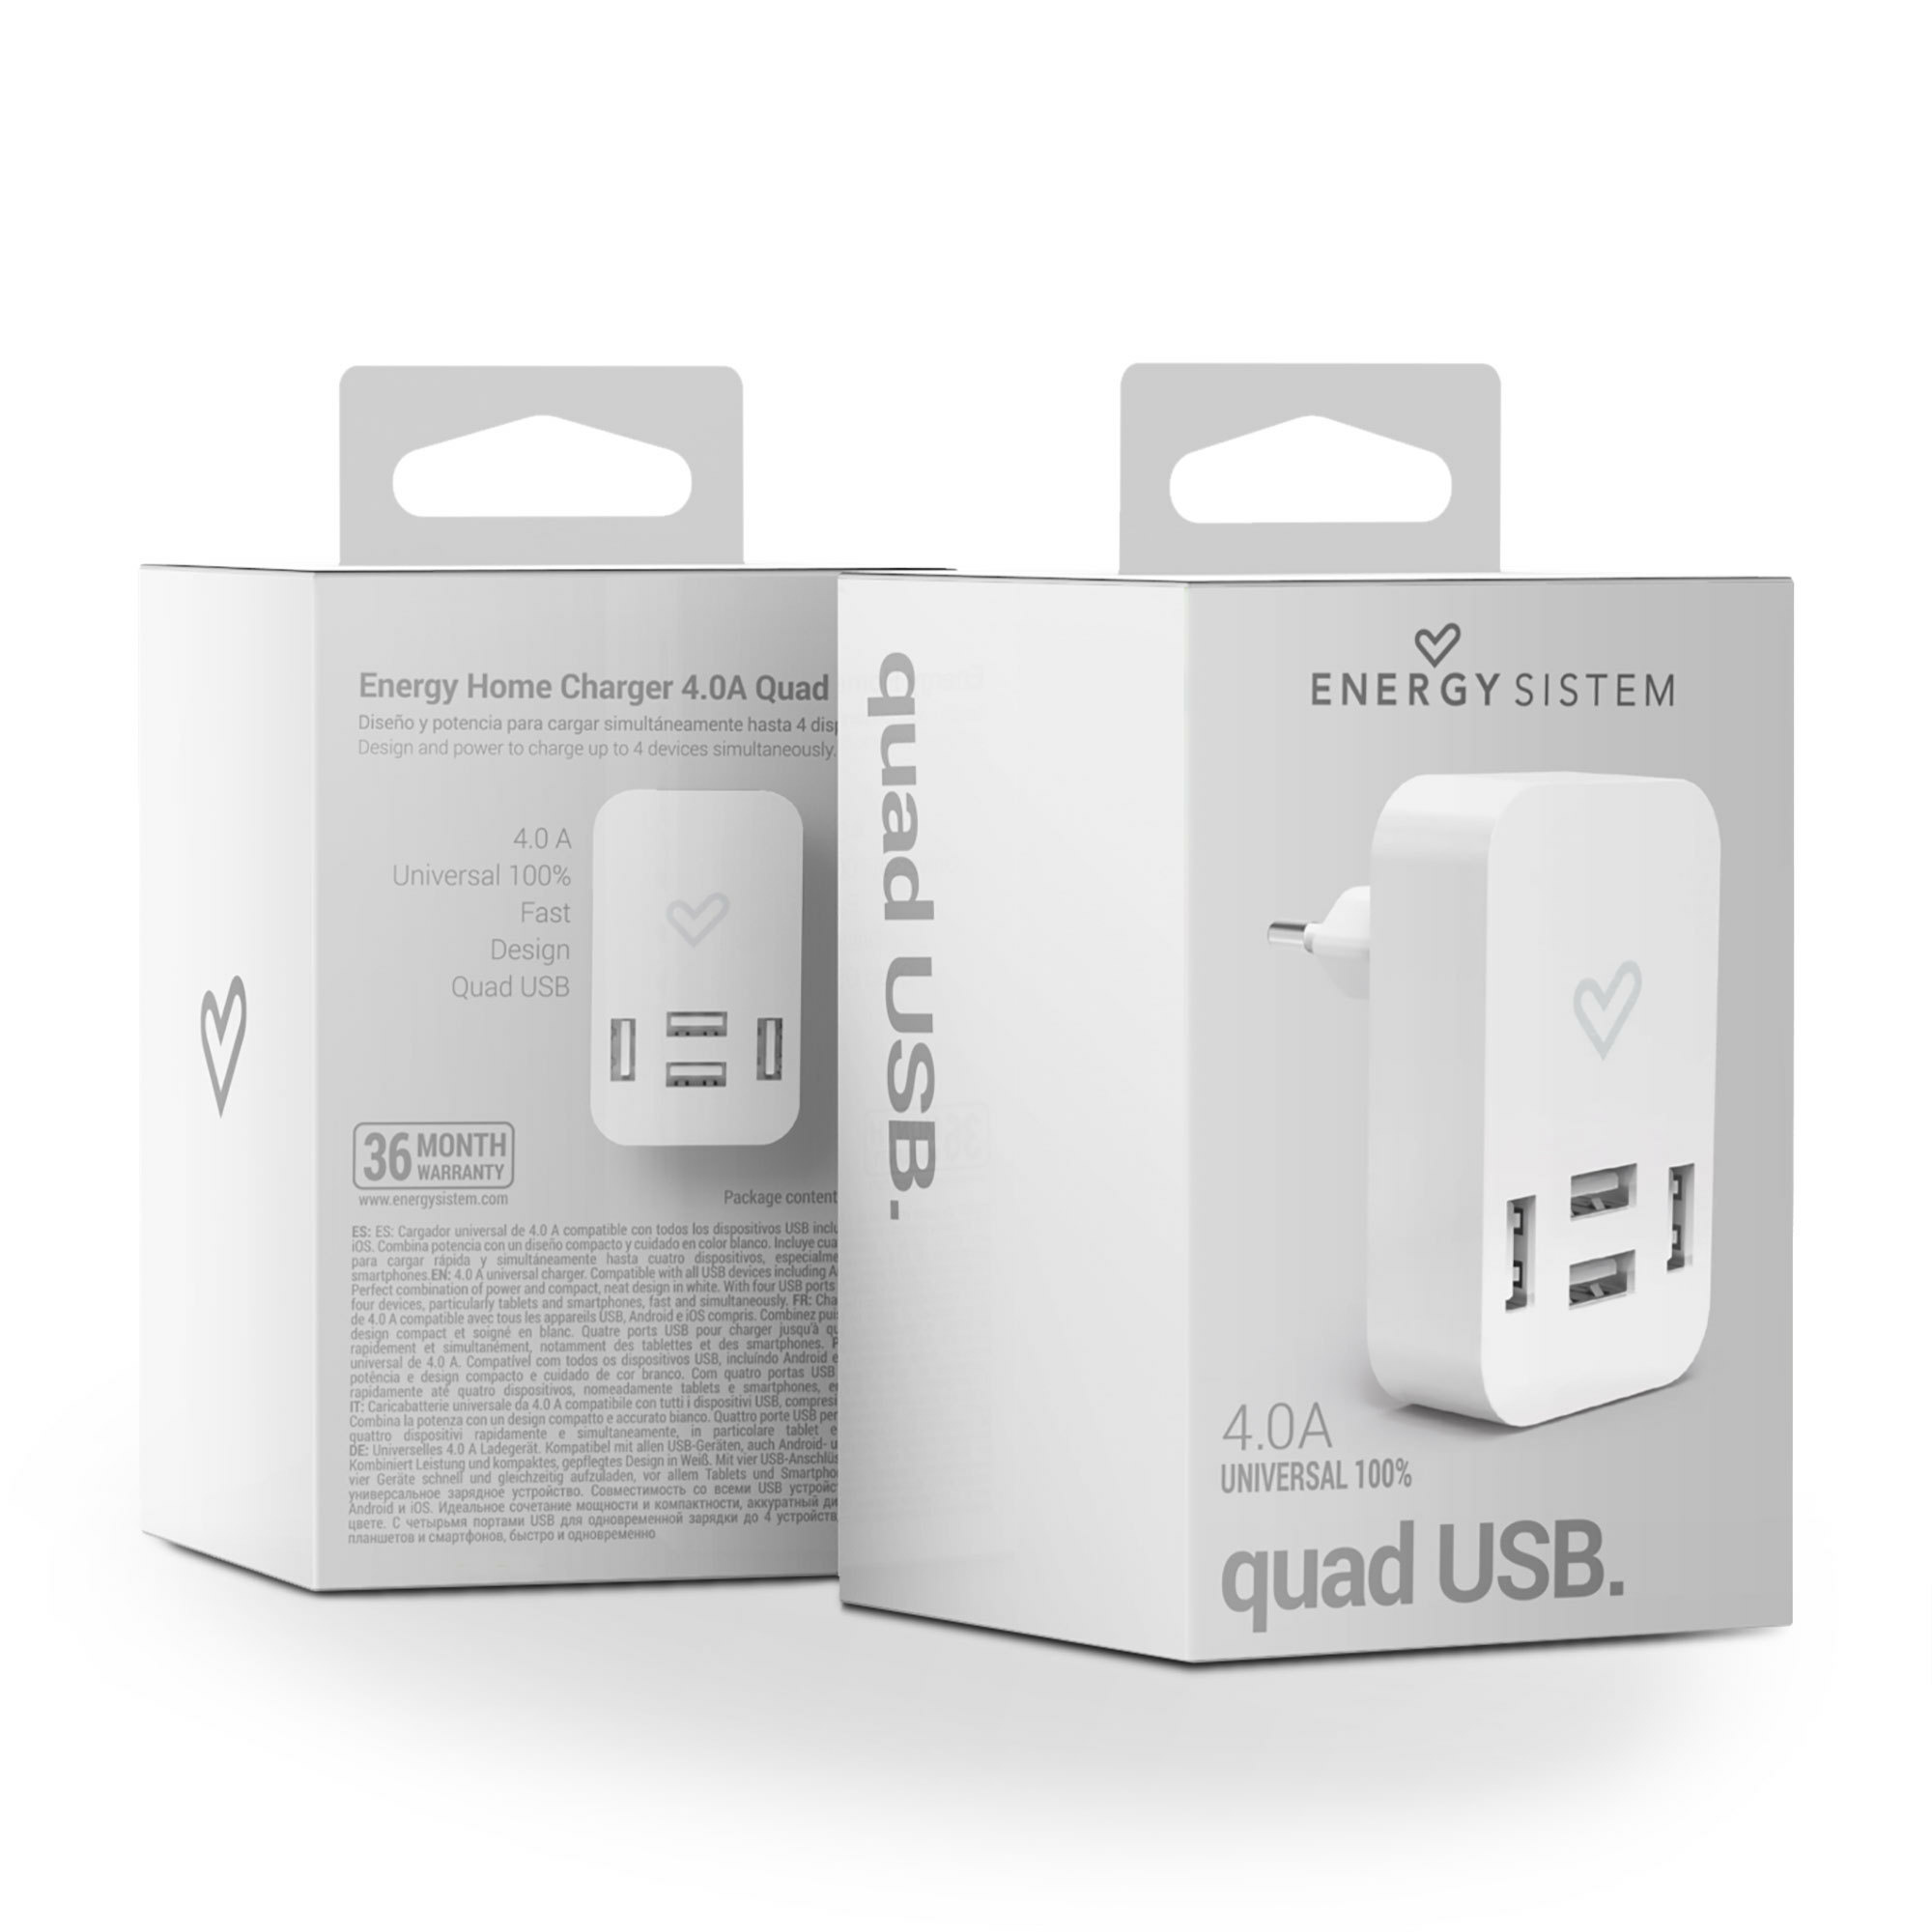 Packaging Energy Home Charger 4.0A Quad USB